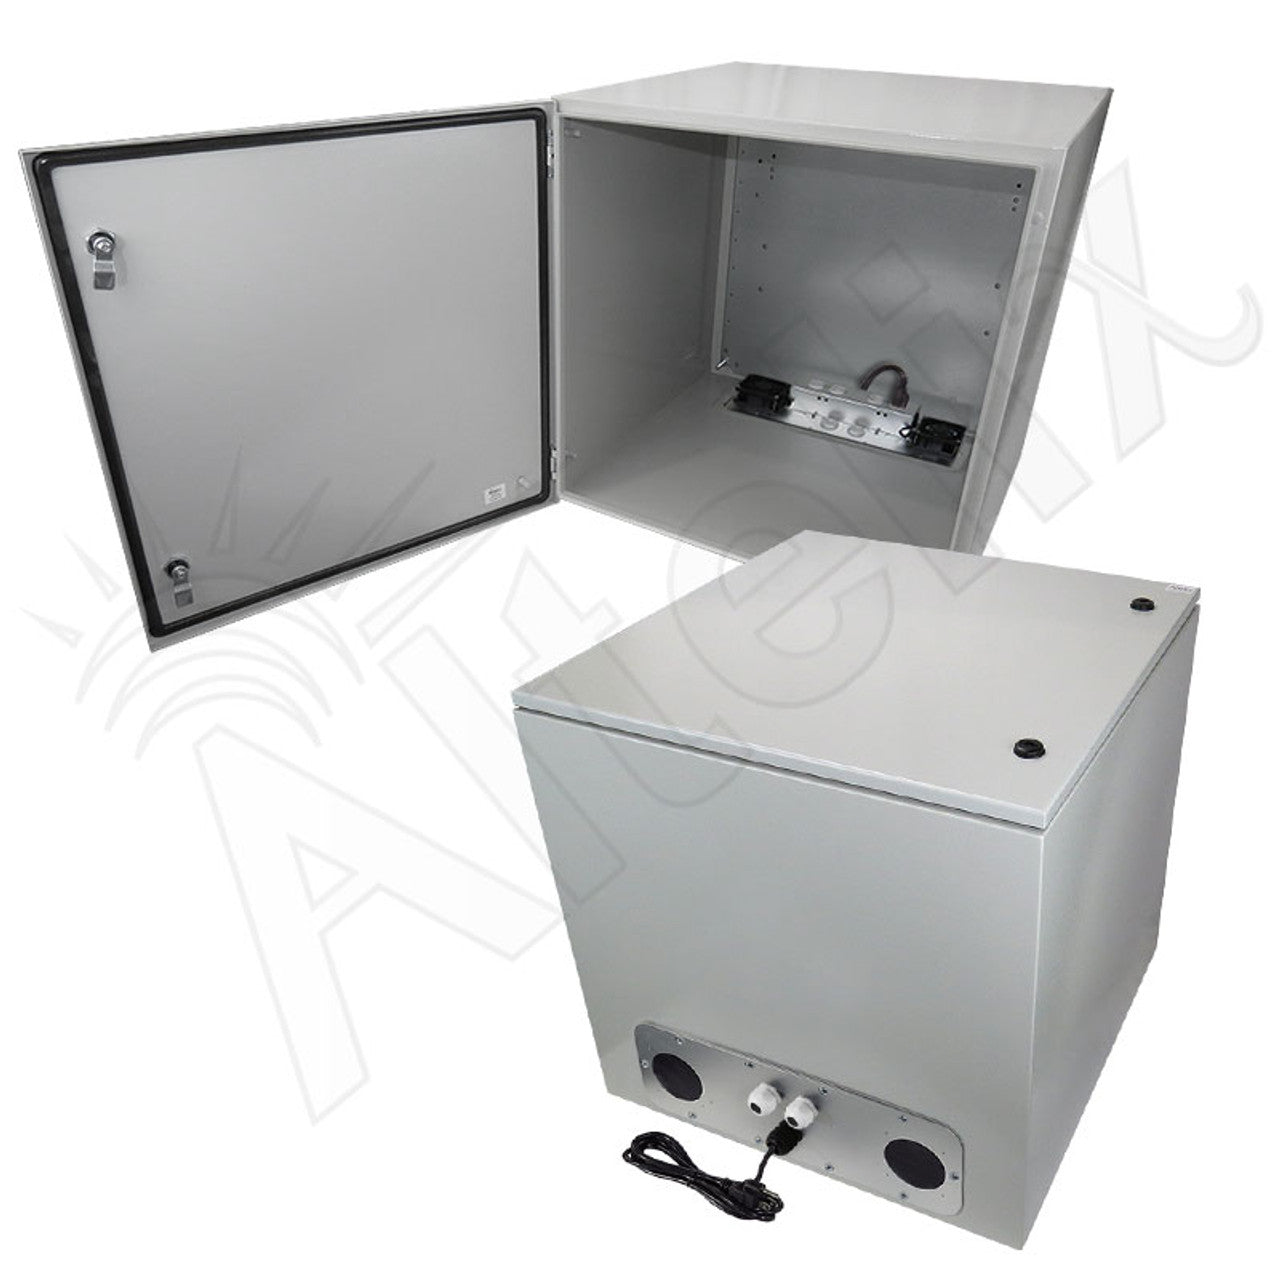 Altelix Steel Heated Weatherproof NEMA Enclosure with Dual Cooling Fans, 200W Heater, 120 VAC Outlets and Power Cord-8